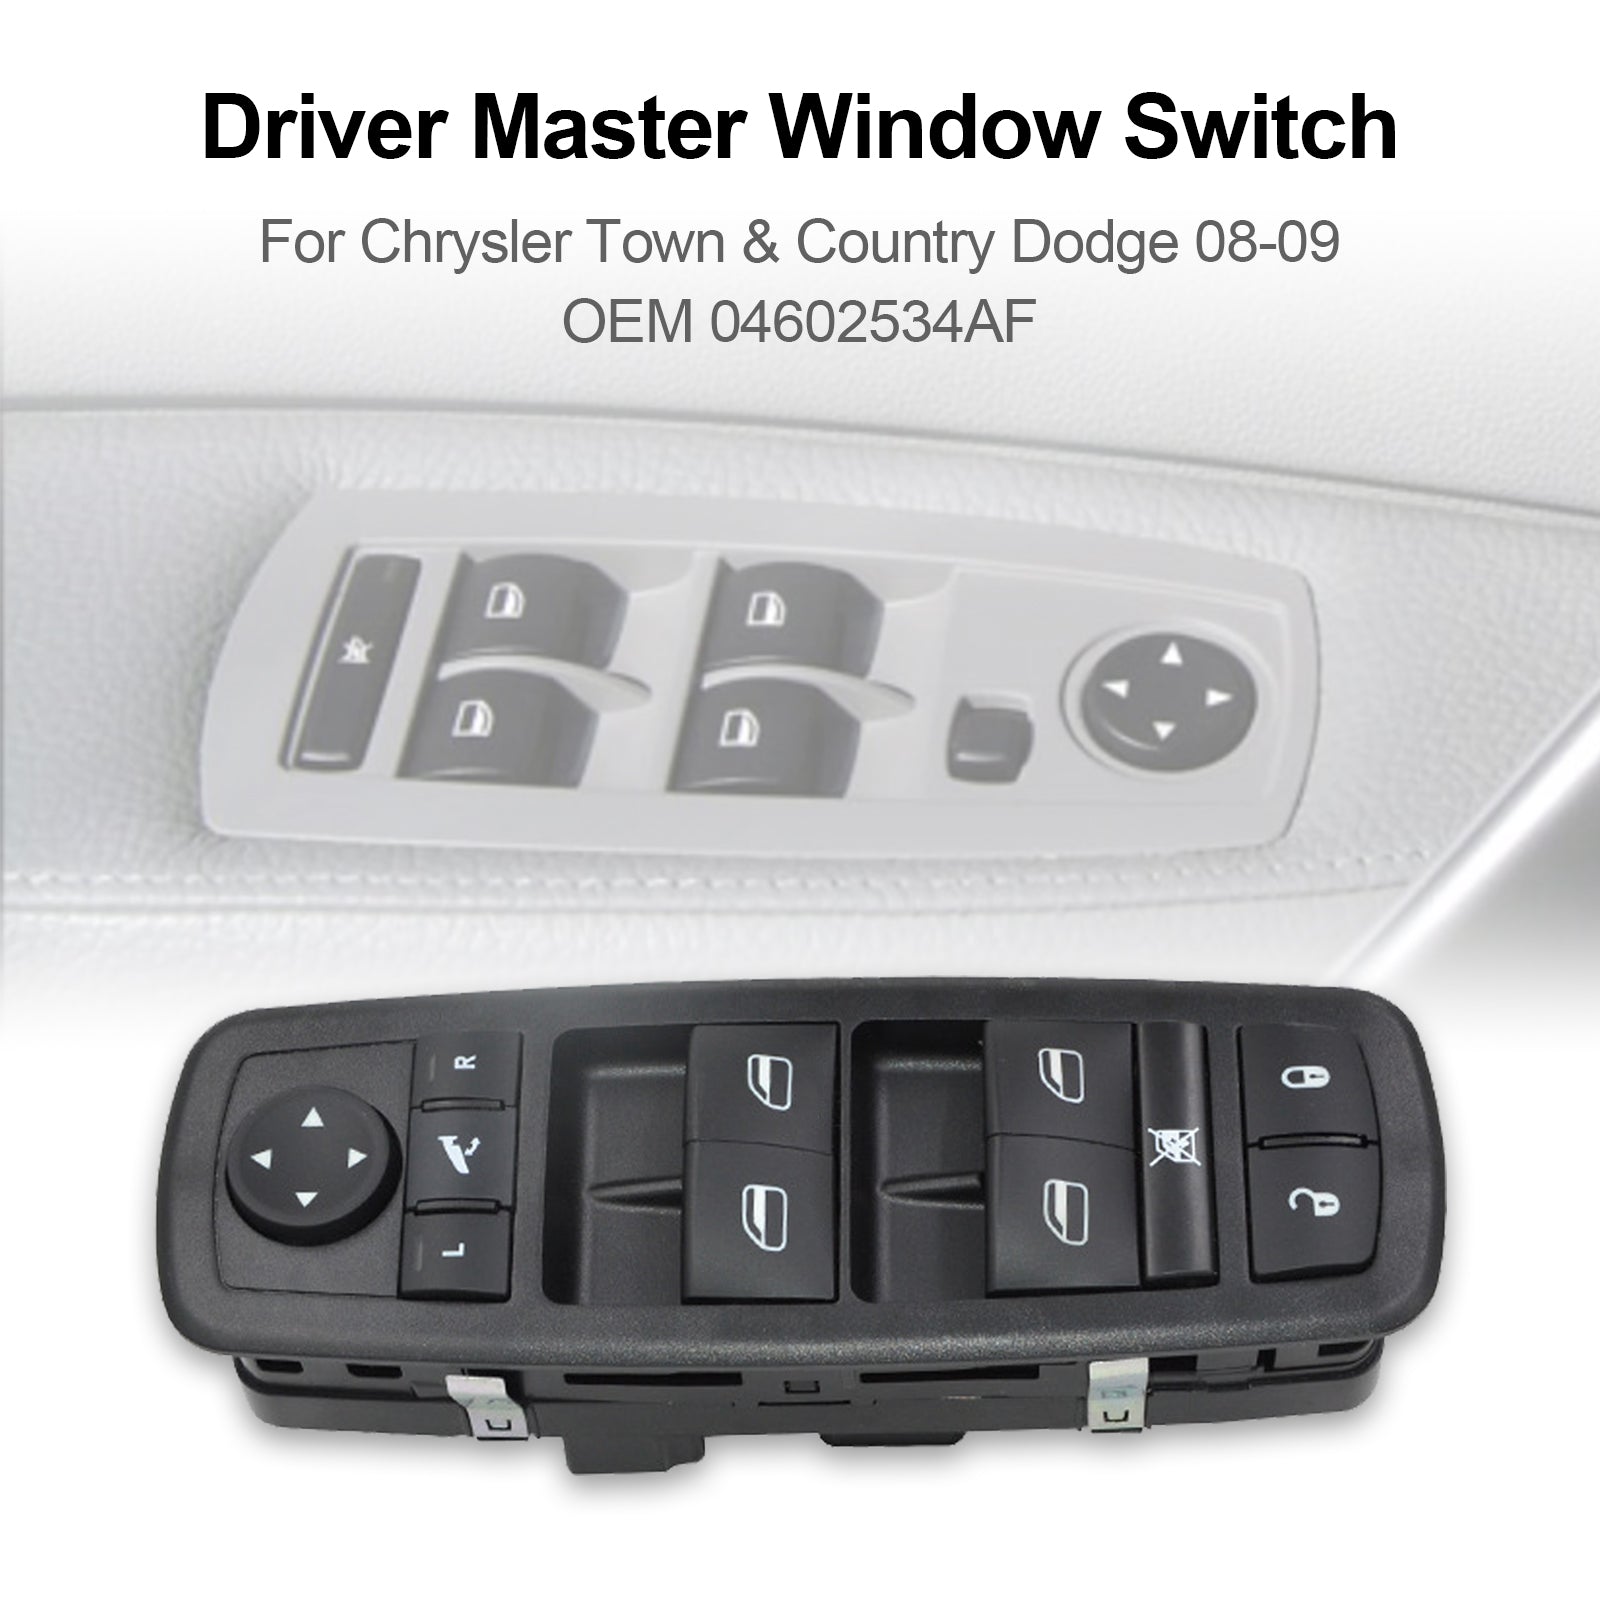 Driver Master Window Switch For Chrysler Town & Country Dodge 08-09 04602534AF Generic